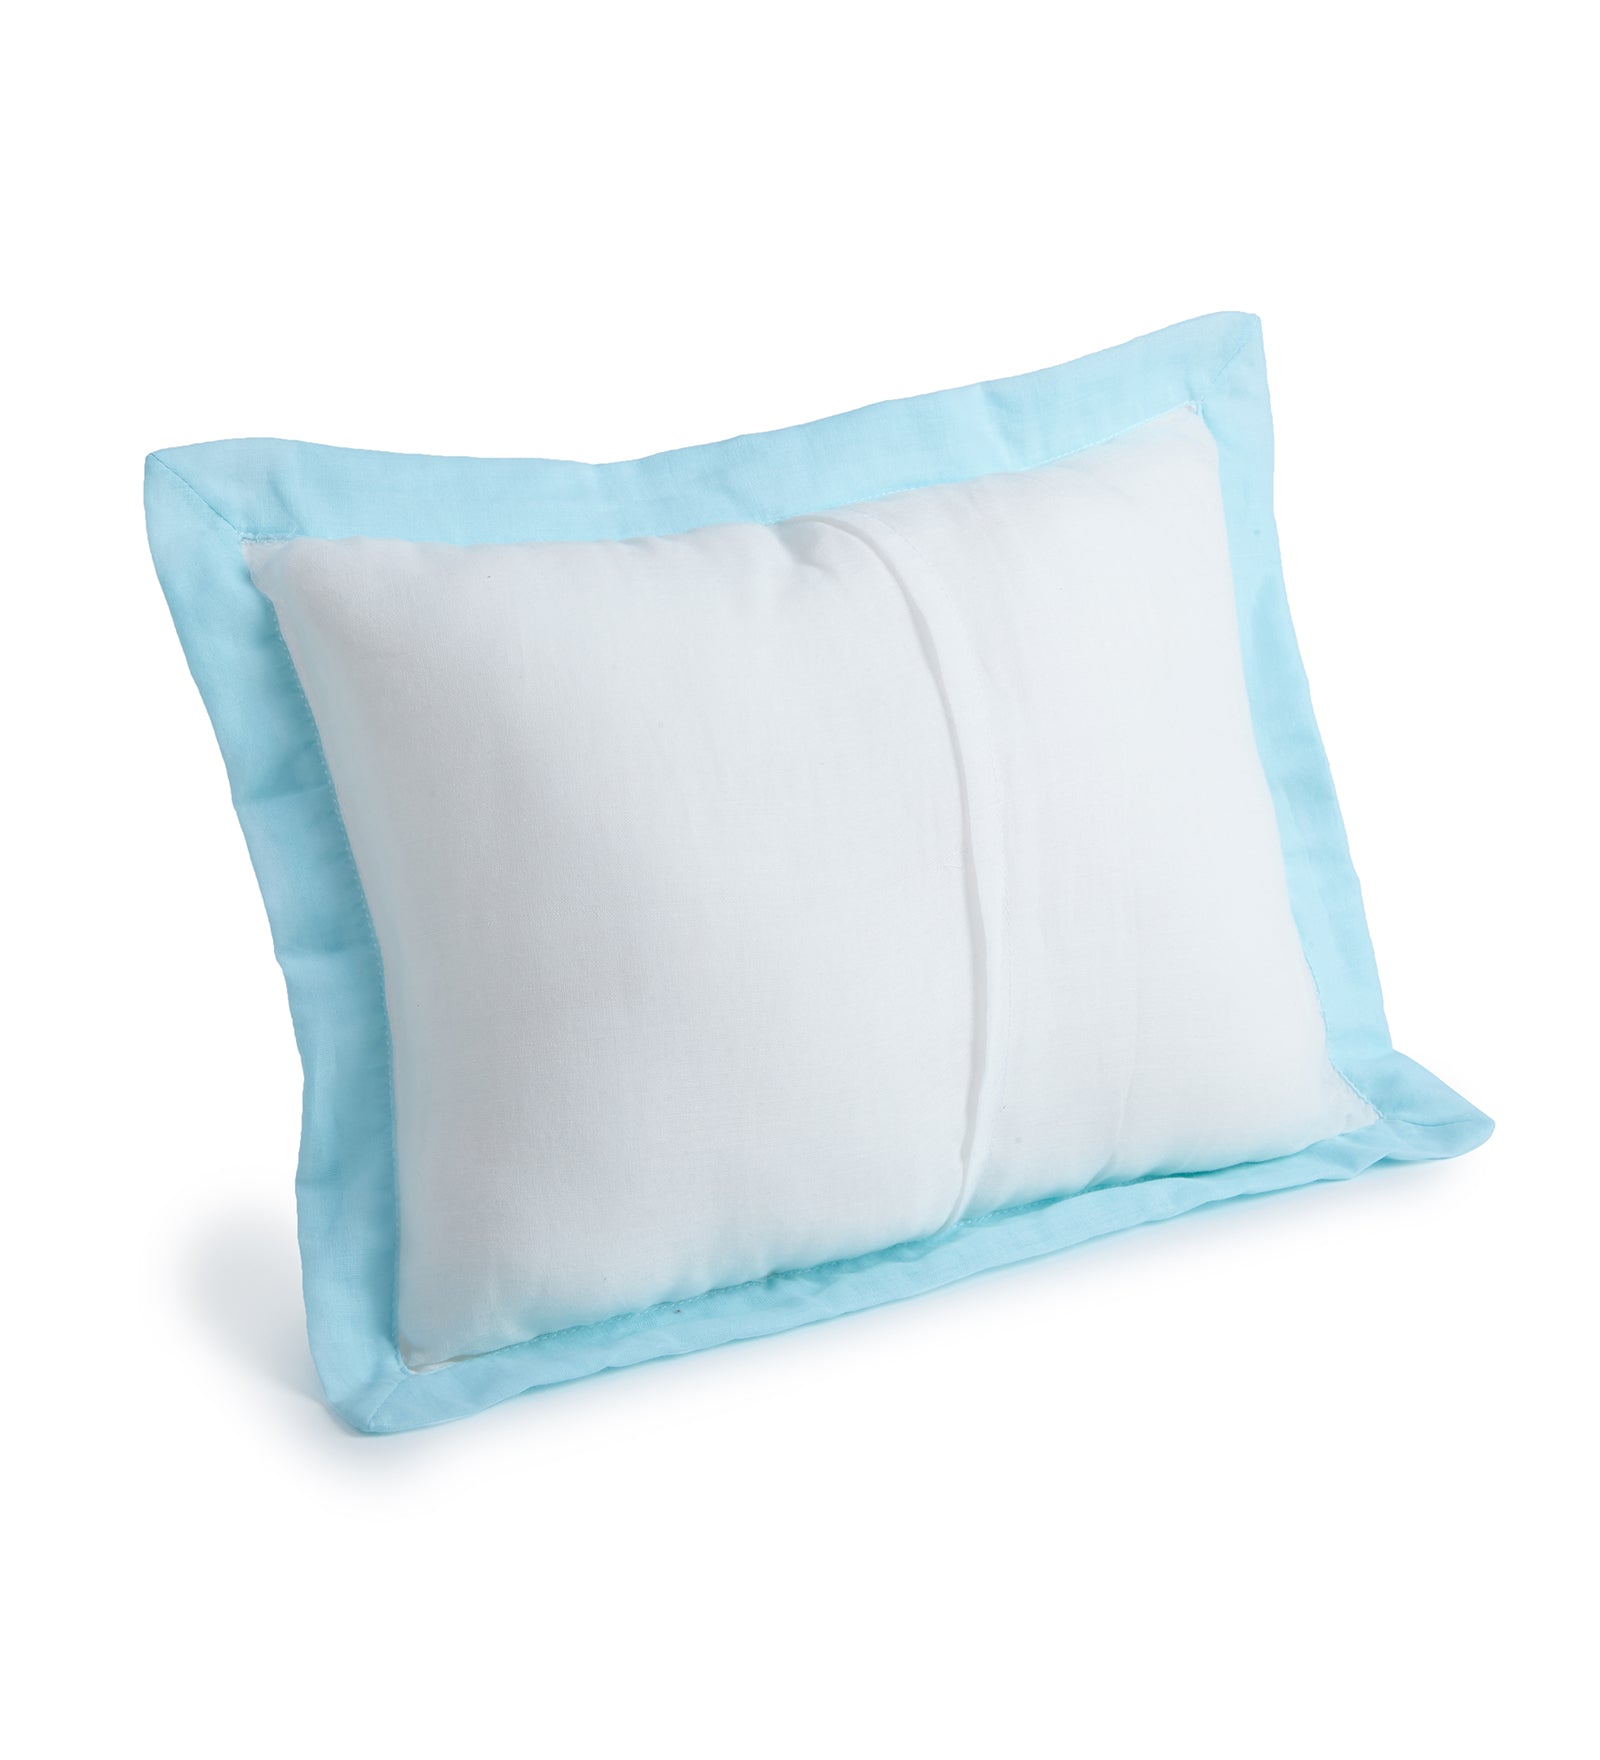 The White Cradle Cot Pillow + 2 Bolsters Set with Fillers - White